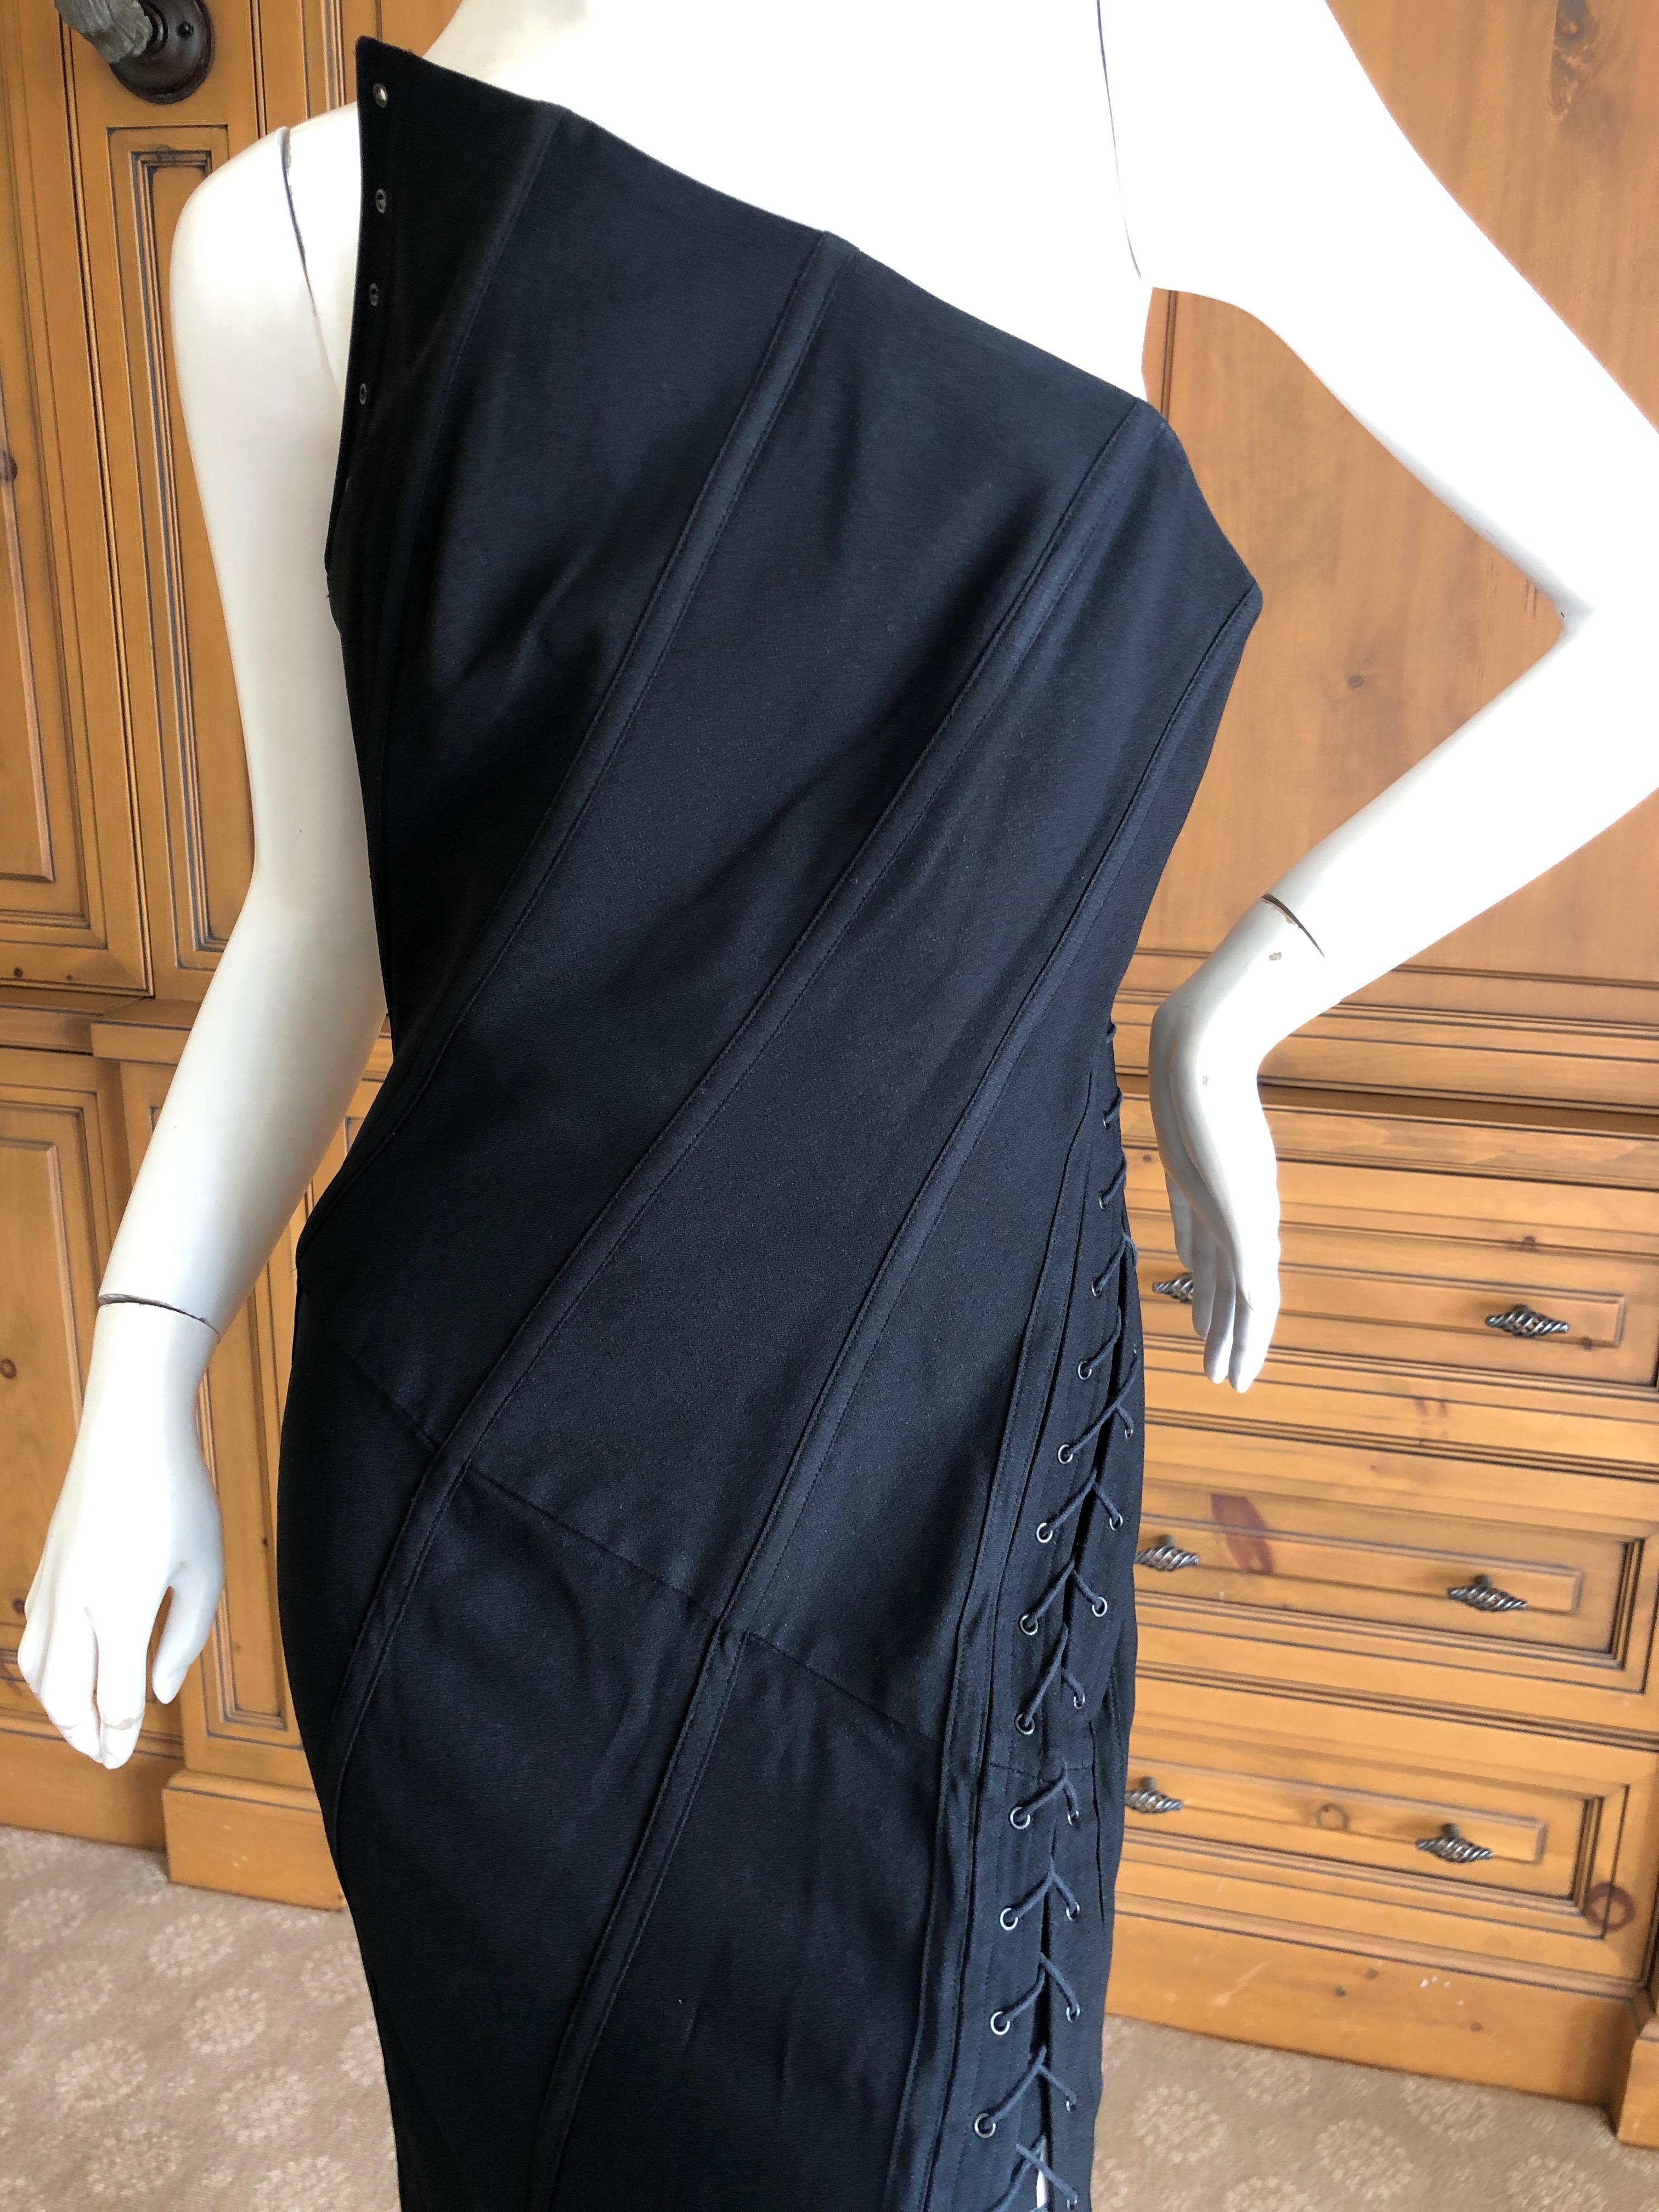 John Galliano Spring 2000 Goth Black Asymmetrical Lace Up Corset Dress  In Excellent Condition For Sale In Cloverdale, CA